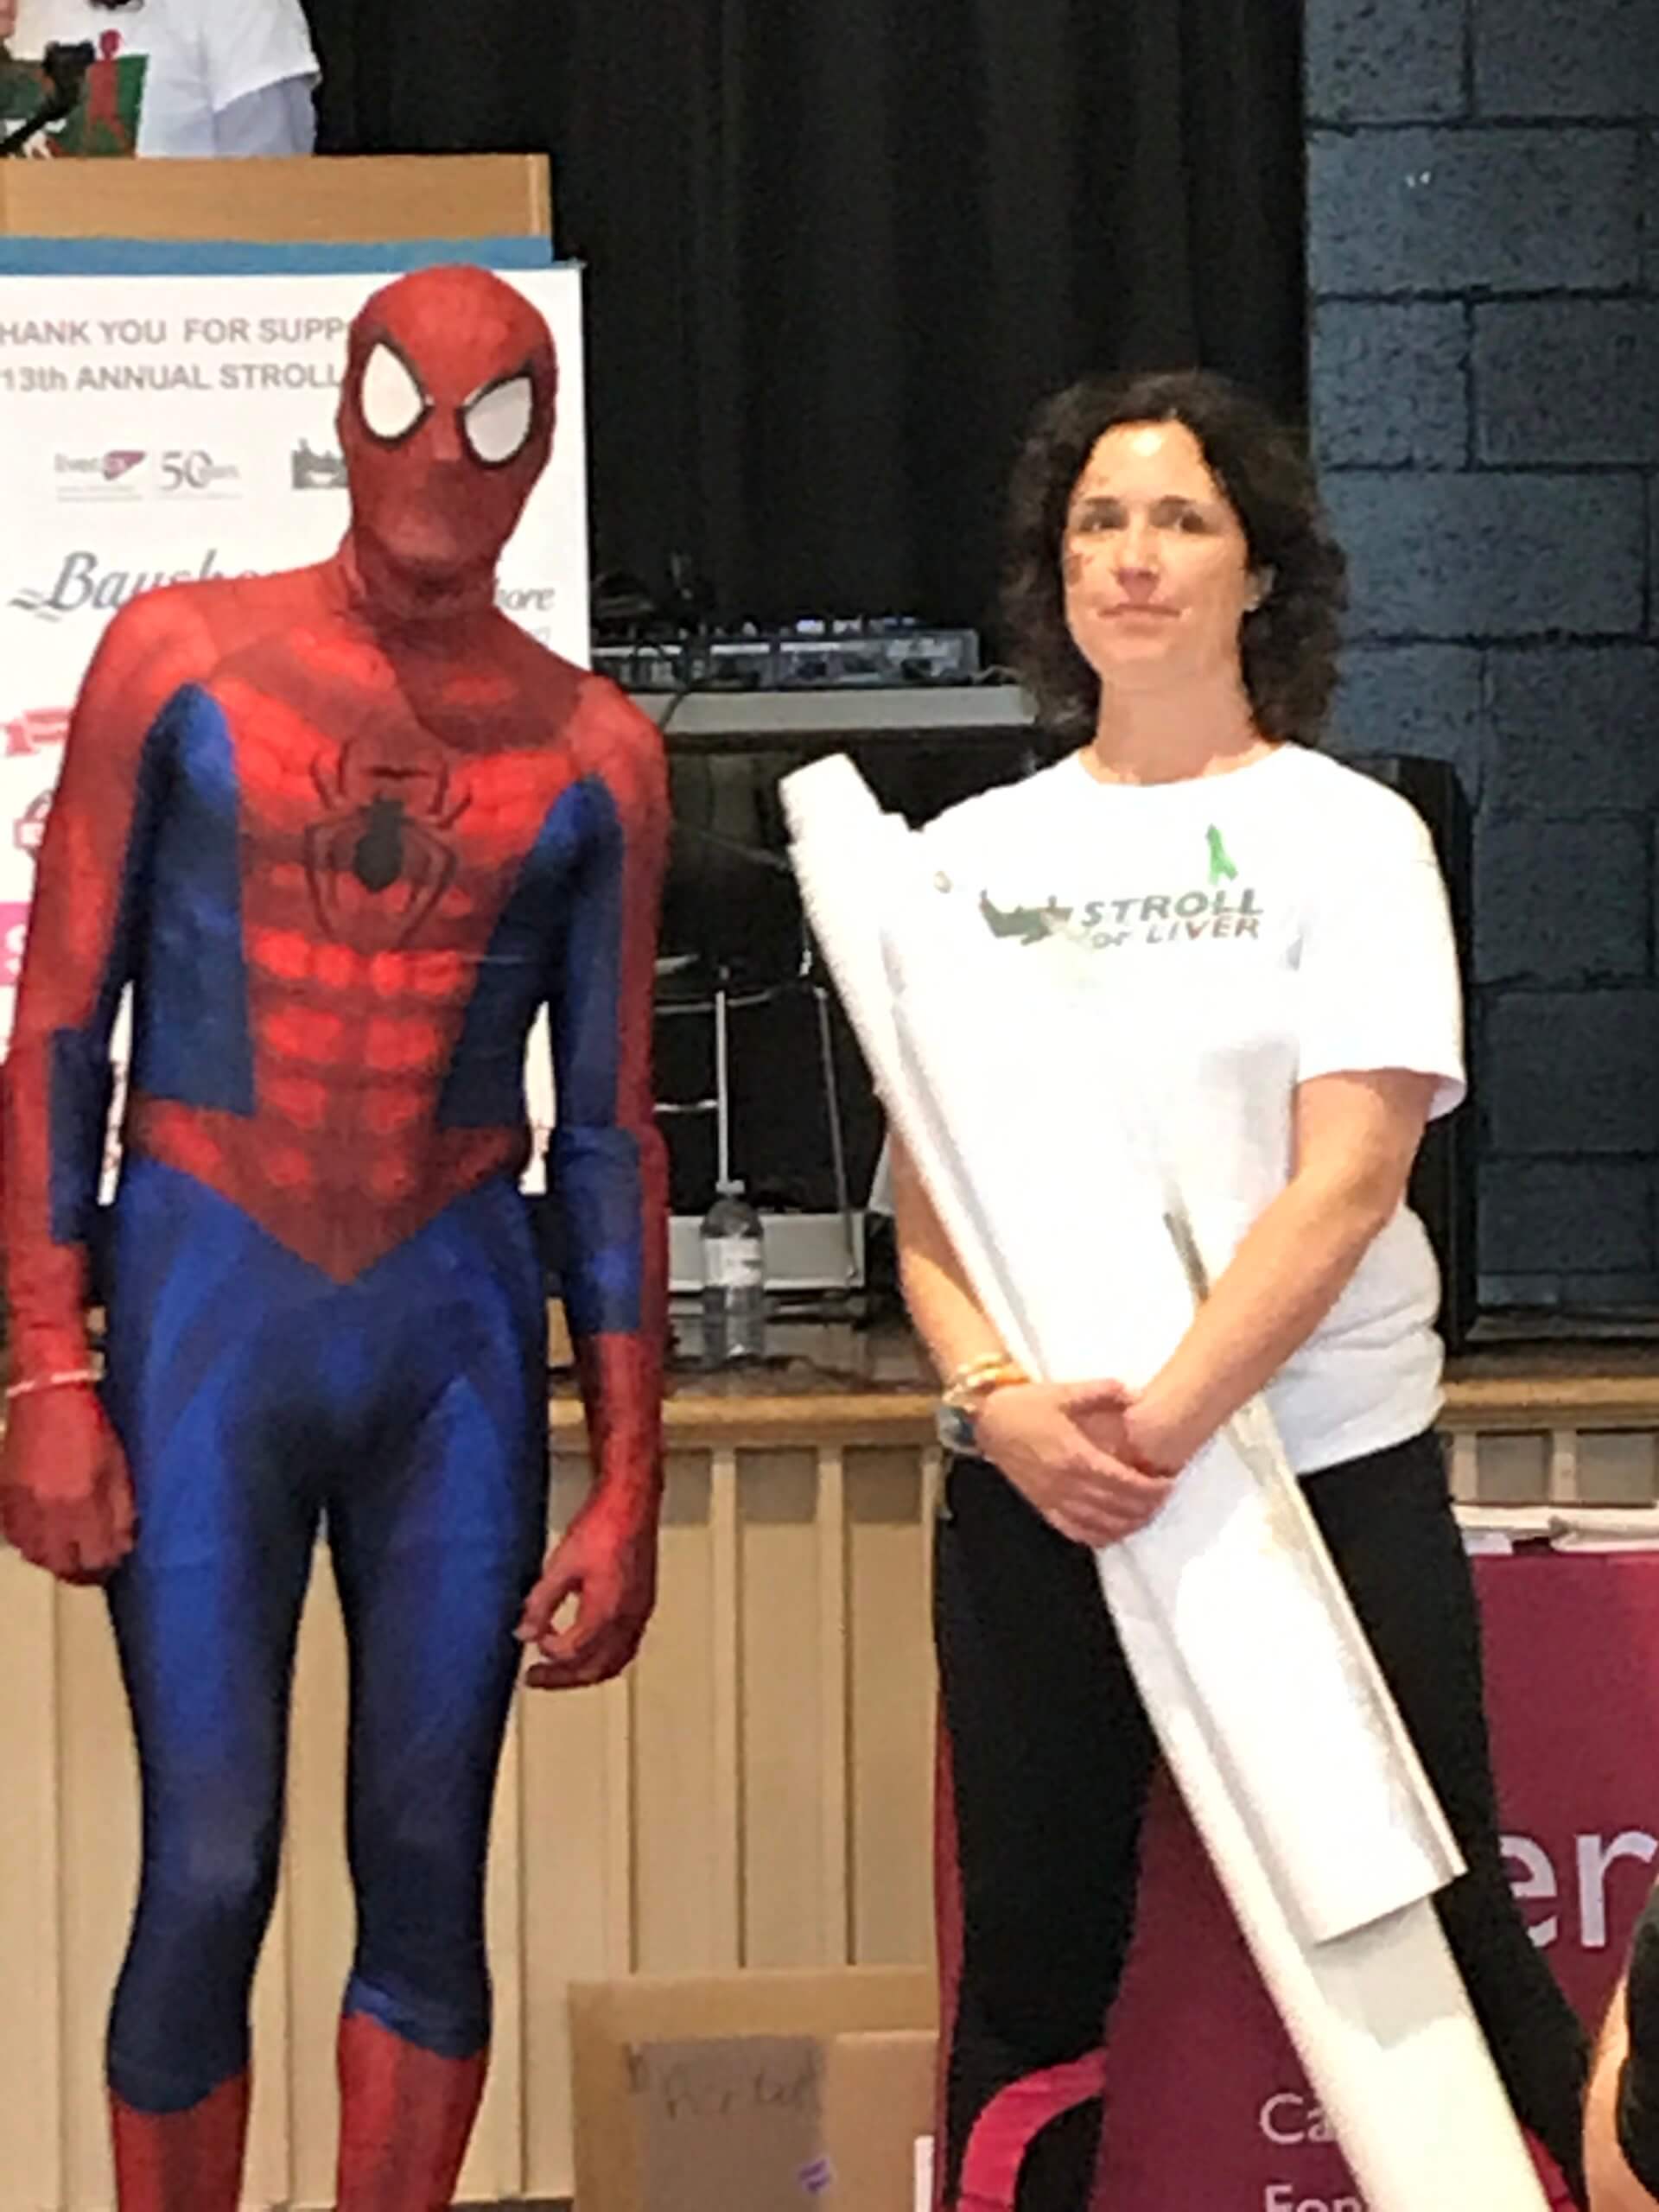 CLF staff, Meghann, with Spider-man at the Stroll